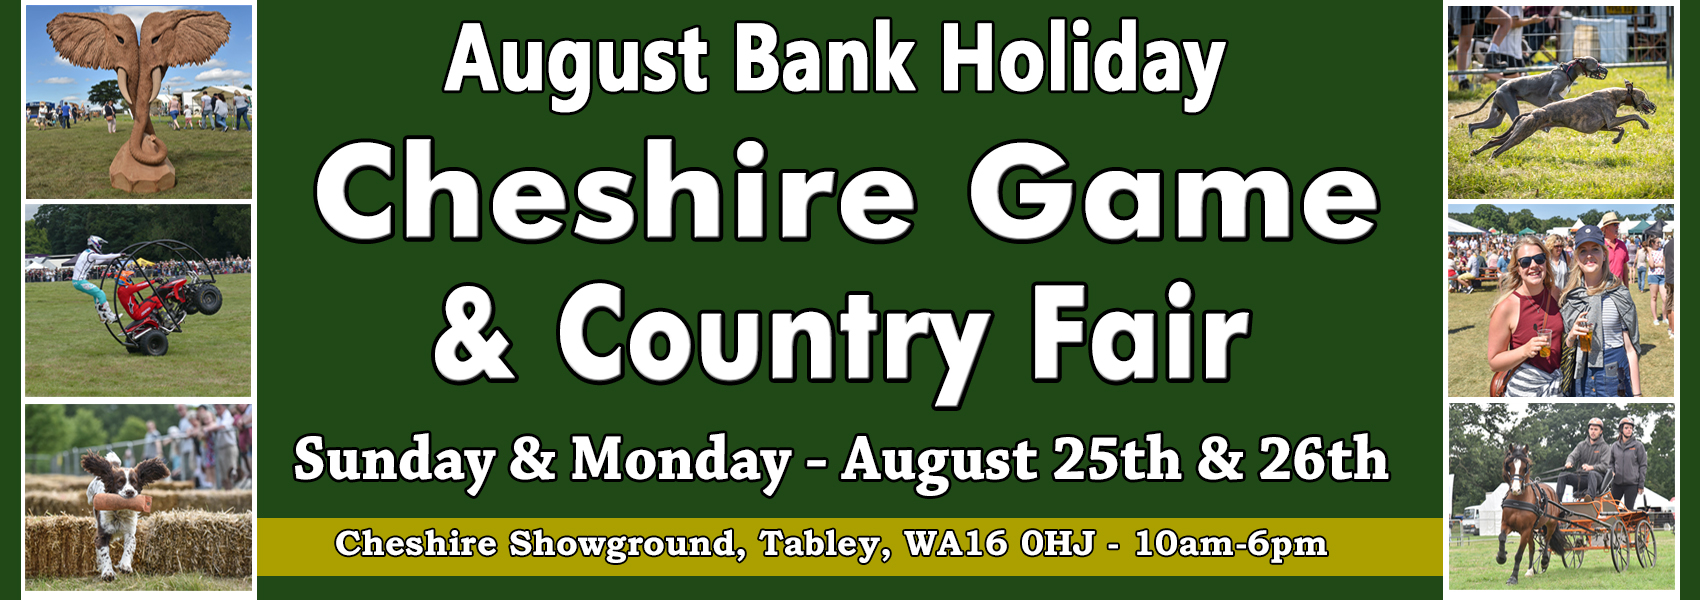 Cheshire Game and Country Fair